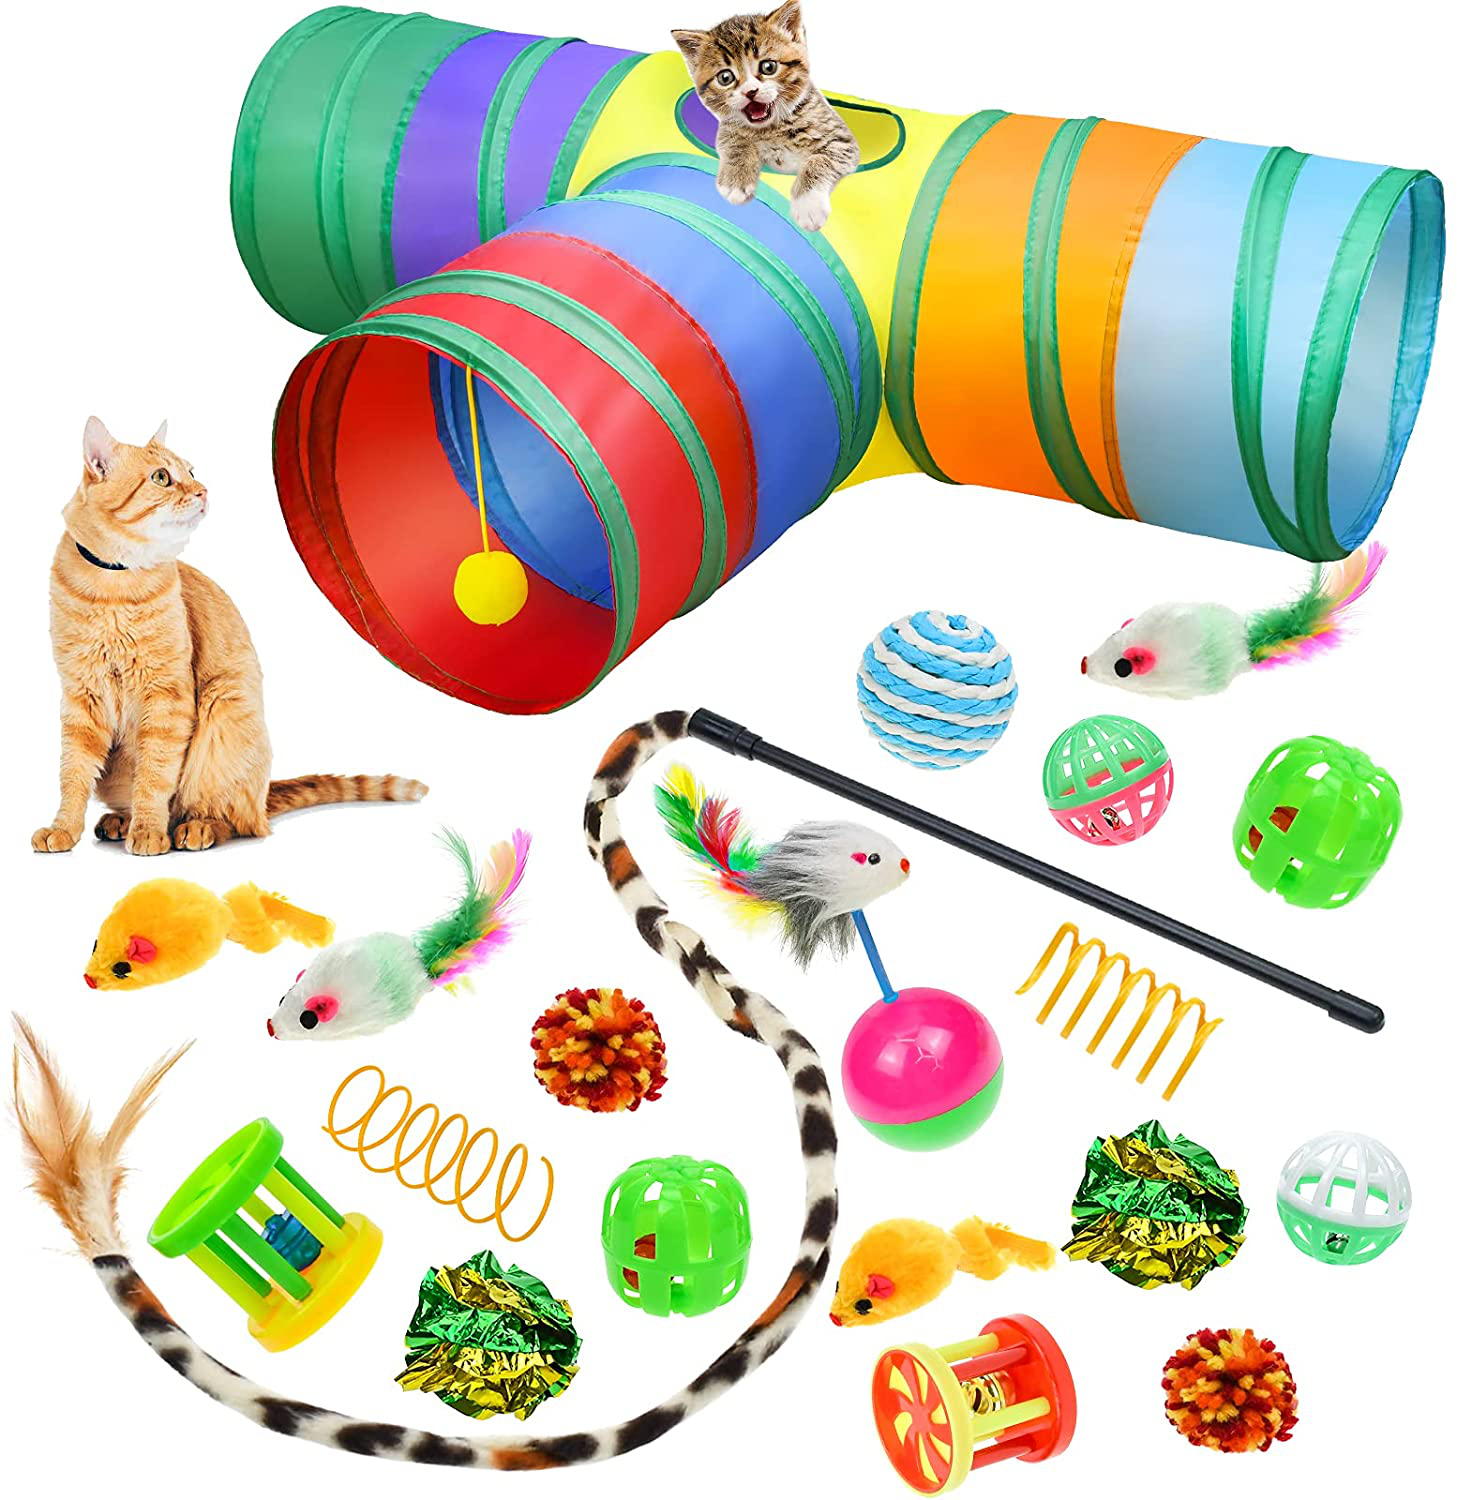 Malier 20 PCS Cat Kitten Toys Set, Collapsible Cat Tunnels for Indoor Cats, Interactive Cat Feather Toy Fluffy Mouse Crinkle Balls Cat 3 Way Tube Tunnel Toys for Cat Puppy Kitty Kitten Animals & Pet Supplies > Pet Supplies > Cat Supplies > Cat Toys Malier A-Rainbow  